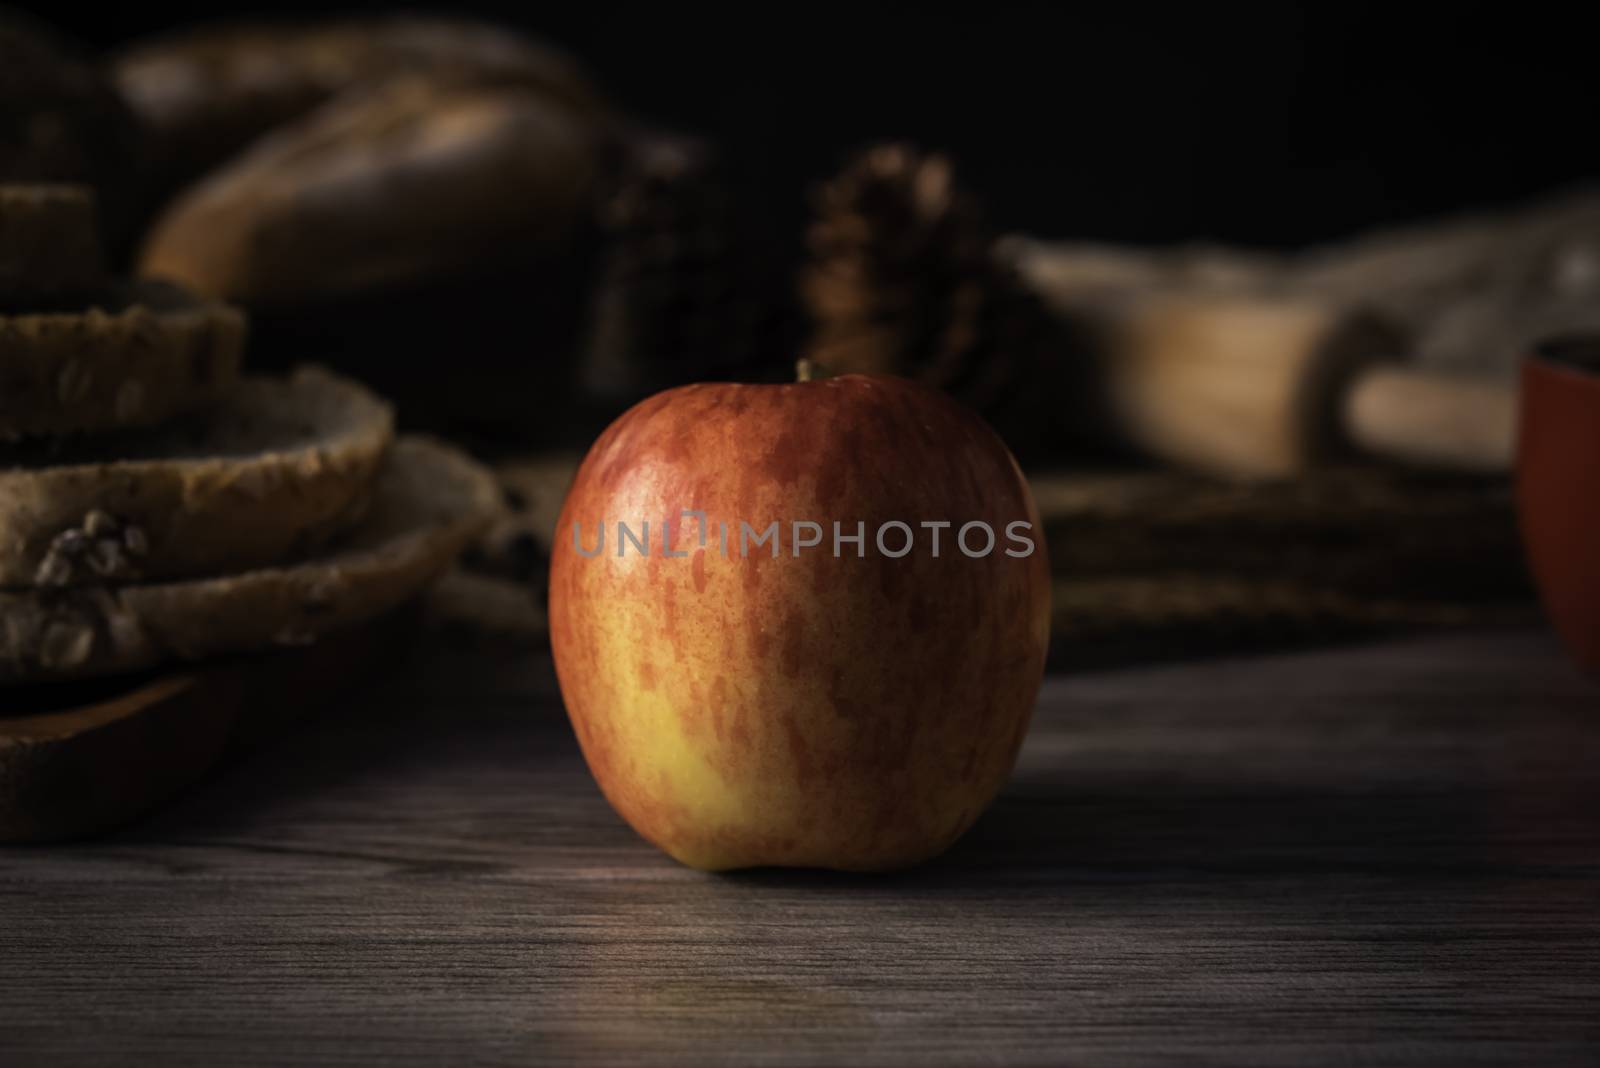 Red apples are laid on a wooden floor - concept lifestyle by photobyphotoboy